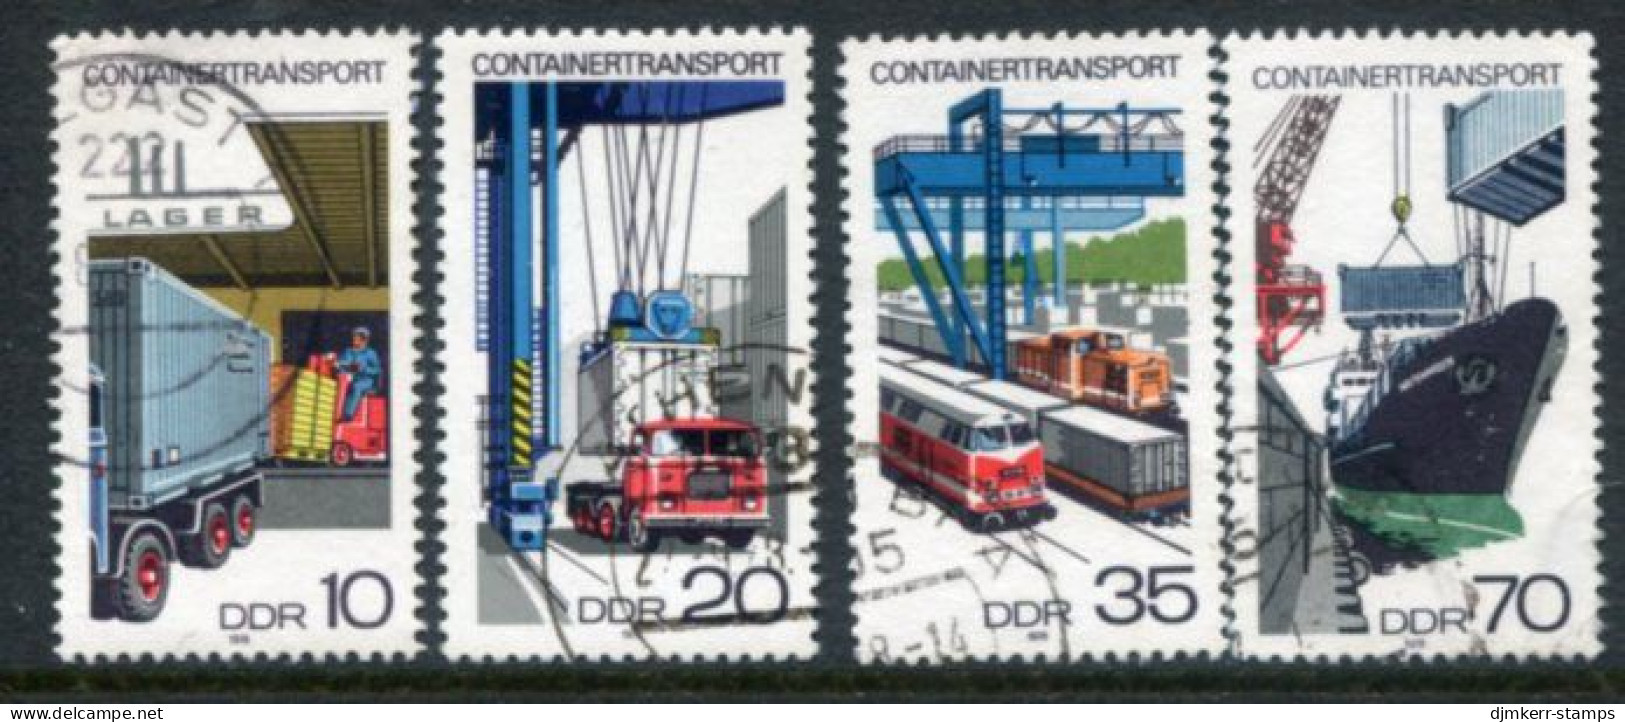 DDR / E. GERMANY 1978 Container Transport Used.  Michel 2326-29 - Usados